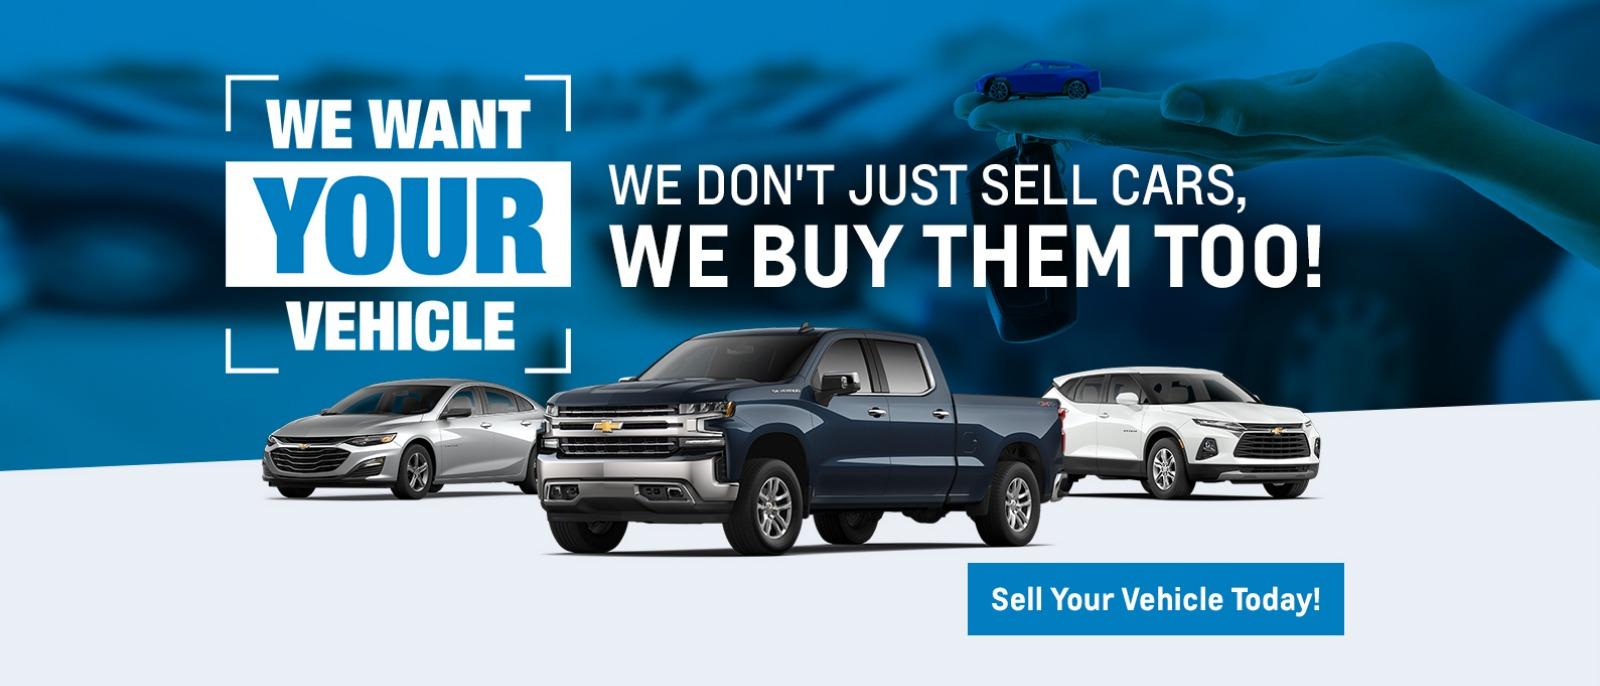 We want your vehicle